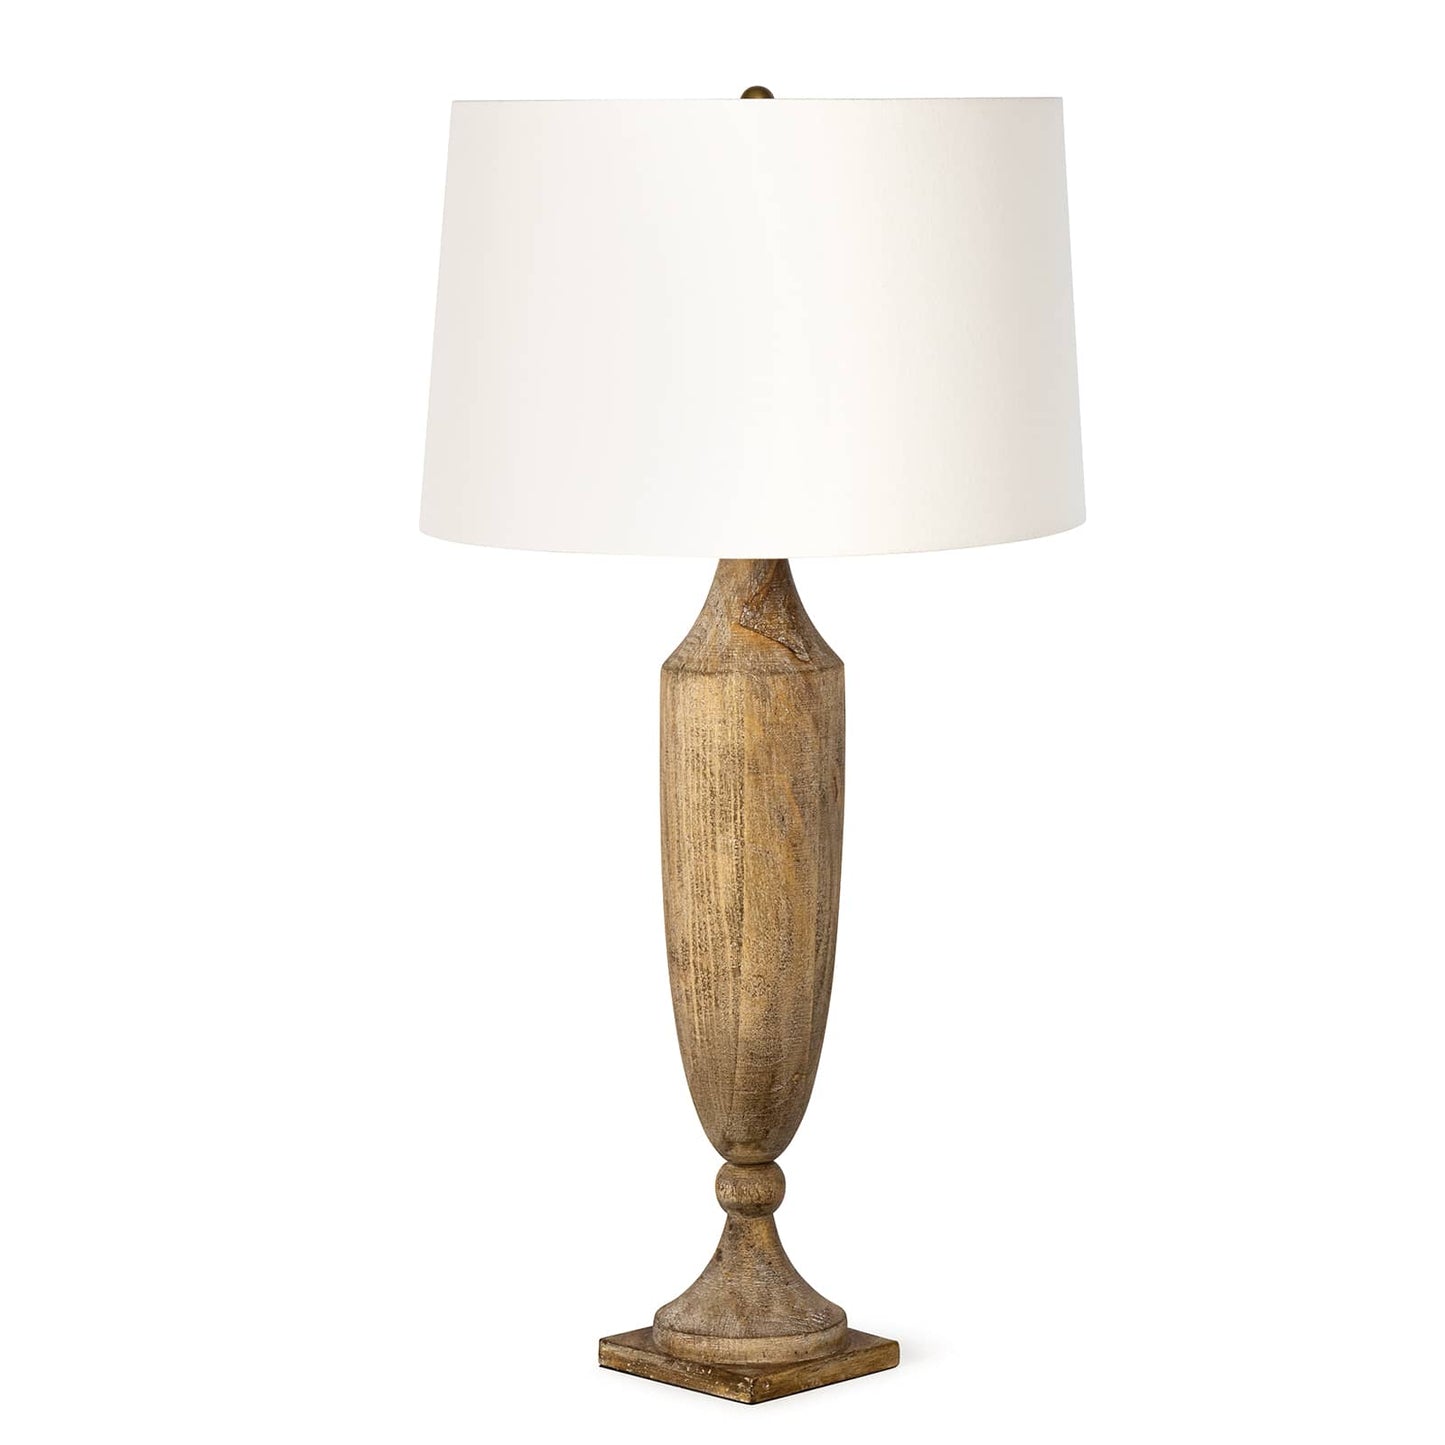 Georgina Wood Table Lamp by Southern Living